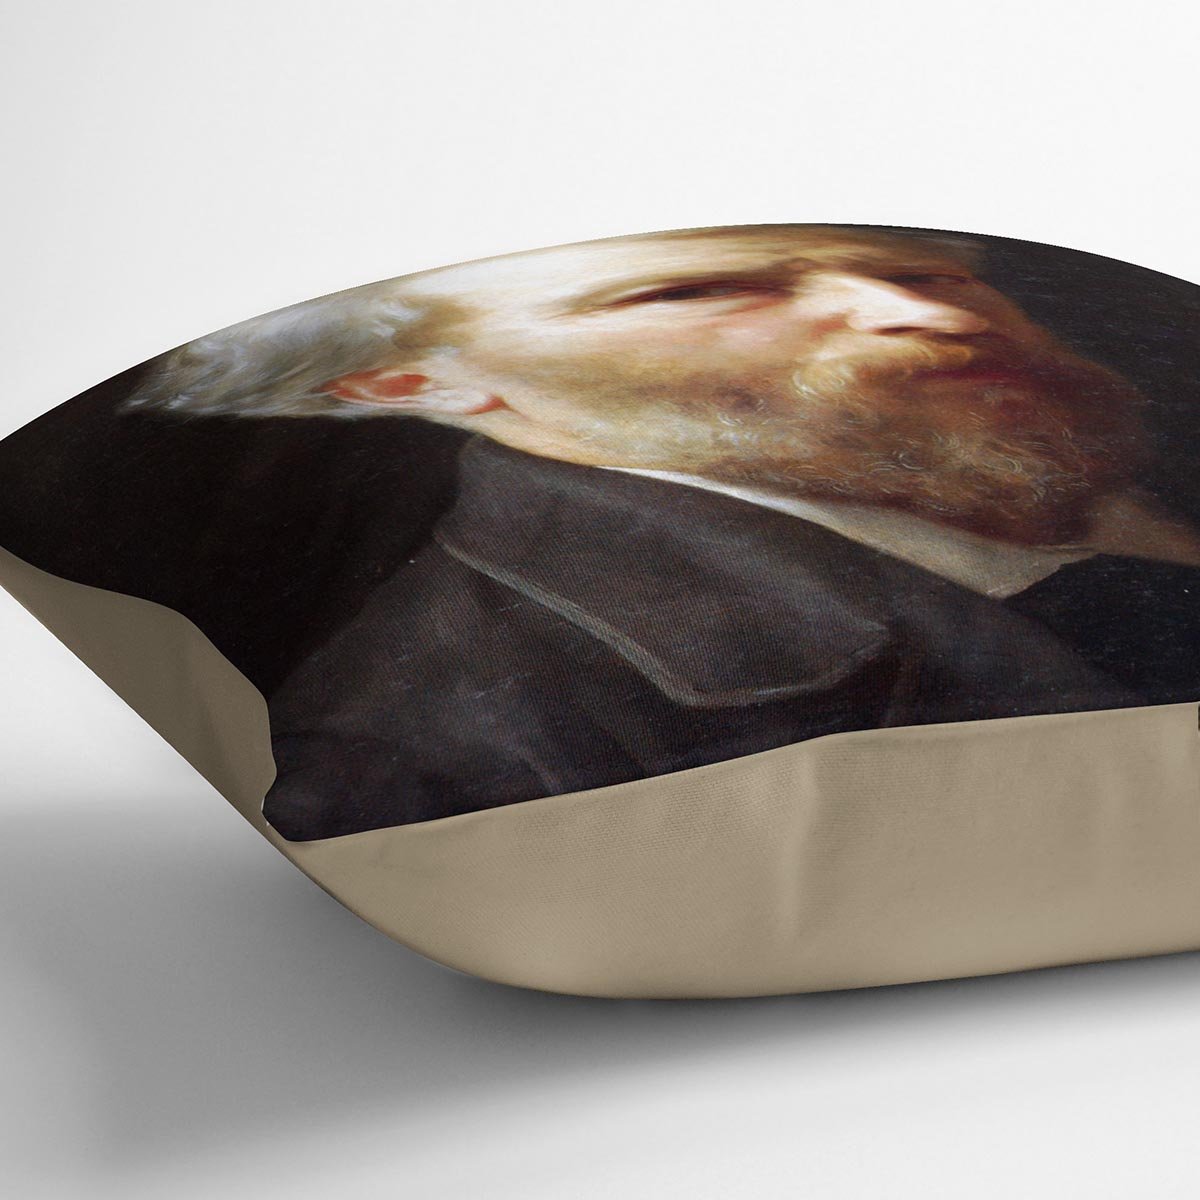 Self-Portrait Presented To M Sage By Bouguereau Throw Pillow